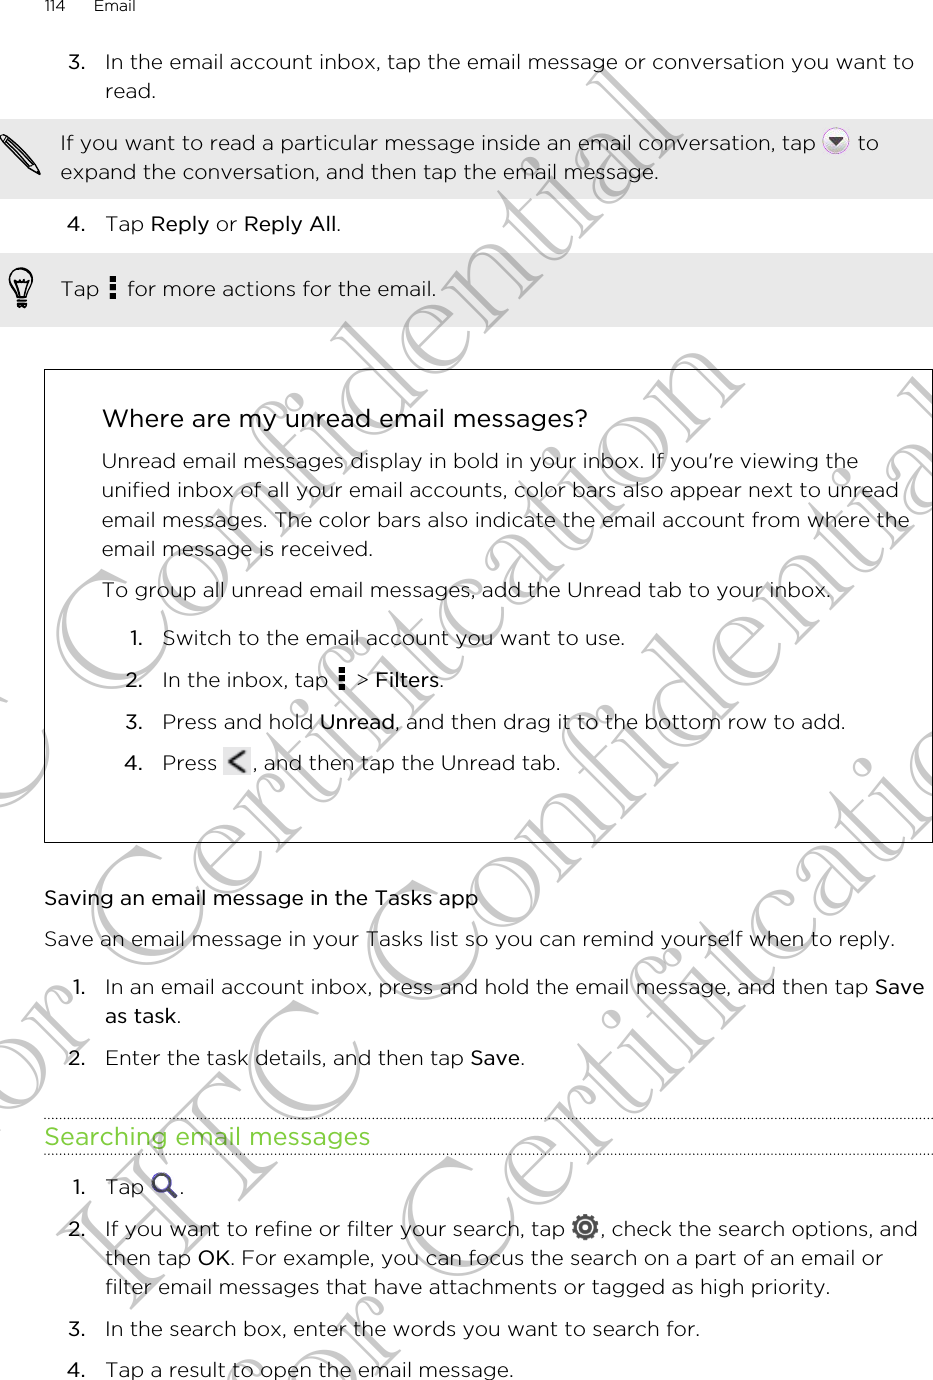 3. In the email account inbox, tap the email message or conversation you want toread. If you want to read a particular message inside an email conversation, tap   toexpand the conversation, and then tap the email message.4. Tap Reply or Reply All. Tap   for more actions for the email.Where are my unread email messages?Unread email messages display in bold in your inbox. If you&apos;re viewing theunified inbox of all your email accounts, color bars also appear next to unreademail messages. The color bars also indicate the email account from where theemail message is received.To group all unread email messages, add the Unread tab to your inbox.1. Switch to the email account you want to use.2. In the inbox, tap   &gt; Filters.3. Press and hold Unread, and then drag it to the bottom row to add.4. Press  , and then tap the Unread tab.Saving an email message in the Tasks appSave an email message in your Tasks list so you can remind yourself when to reply.1. In an email account inbox, press and hold the email message, and then tap Saveas task.2. Enter the task details, and then tap Save.Searching email messages1. Tap  .2. If you want to refine or filter your search, tap  , check the search options, andthen tap OK. For example, you can focus the search on a part of an email orfilter email messages that have attachments or tagged as high priority.3. In the search box, enter the words you want to search for.4. Tap a result to open the email message.114 EmailHTC Confidential for Certifitcation HTC Confidential for Certifitcation